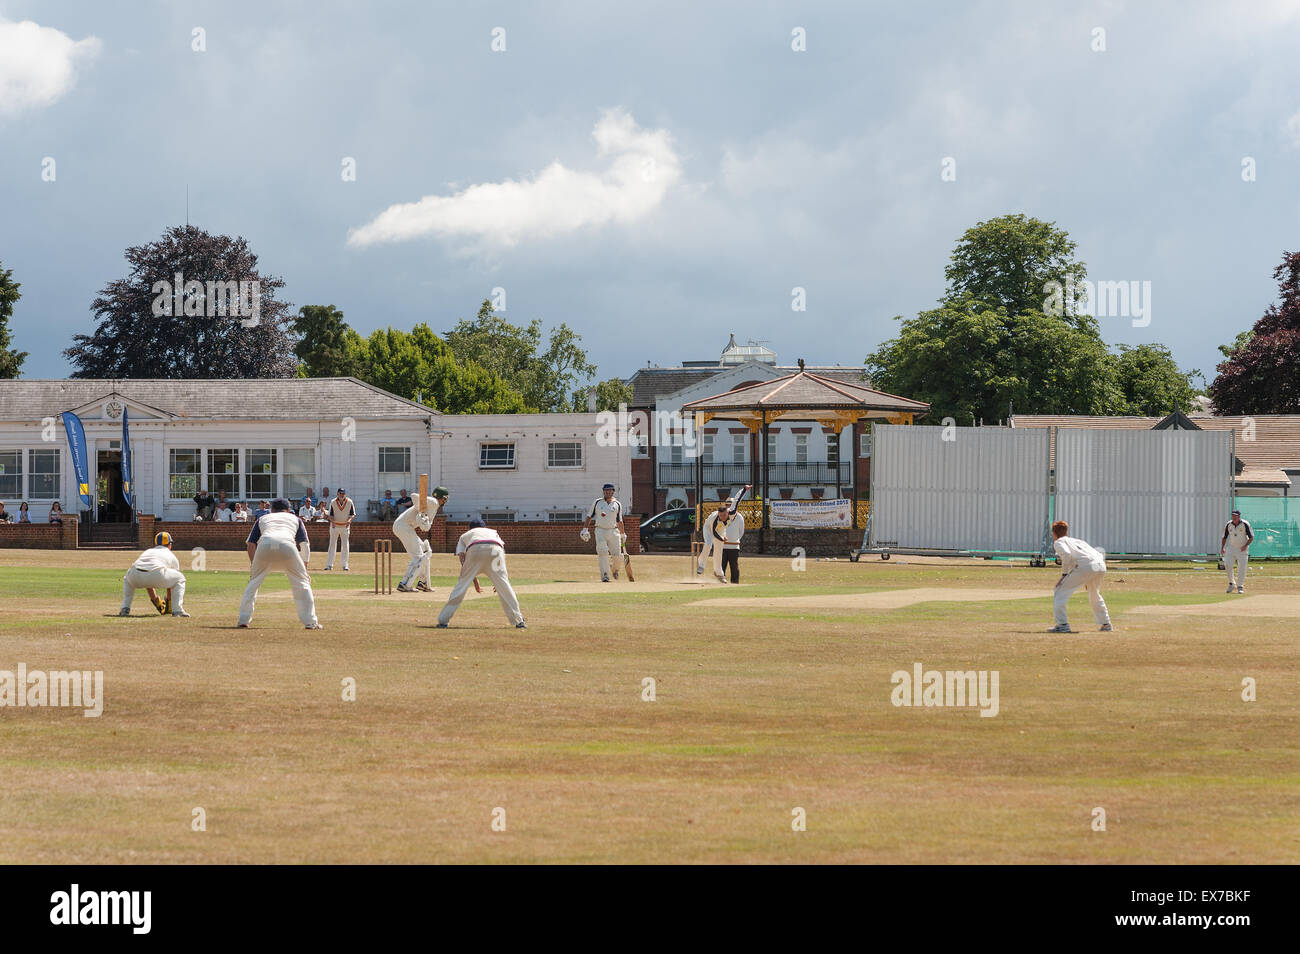 Typically British a game of cricket played on The Vine Sevenoaks surrounded by the 7 oaks with north downs and club house Stock Photo